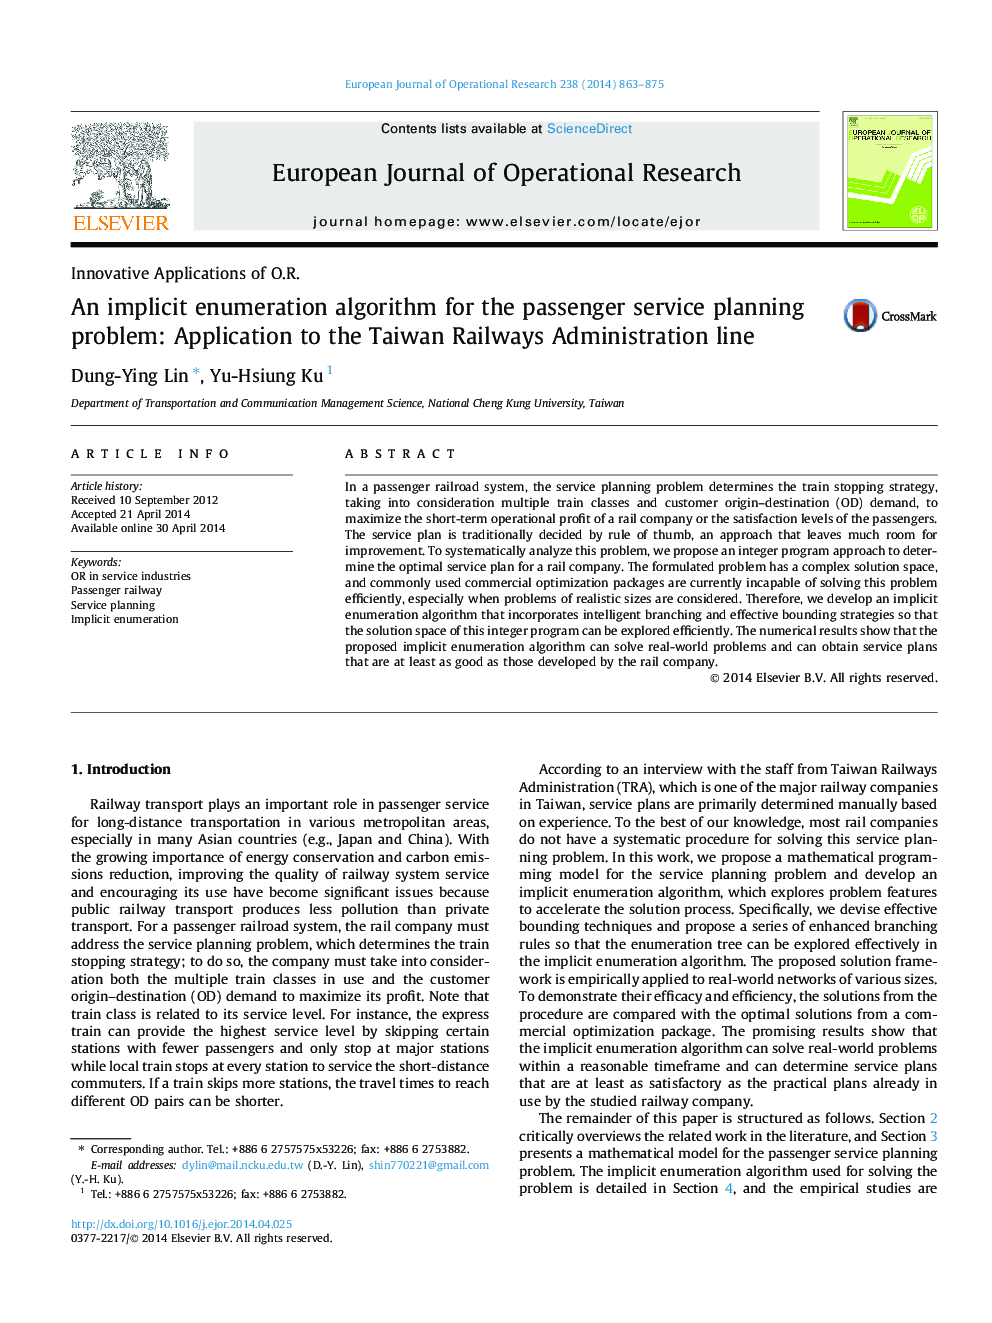 An implicit enumeration algorithm for the passenger service planning problem: Application to the Taiwan Railways Administration line